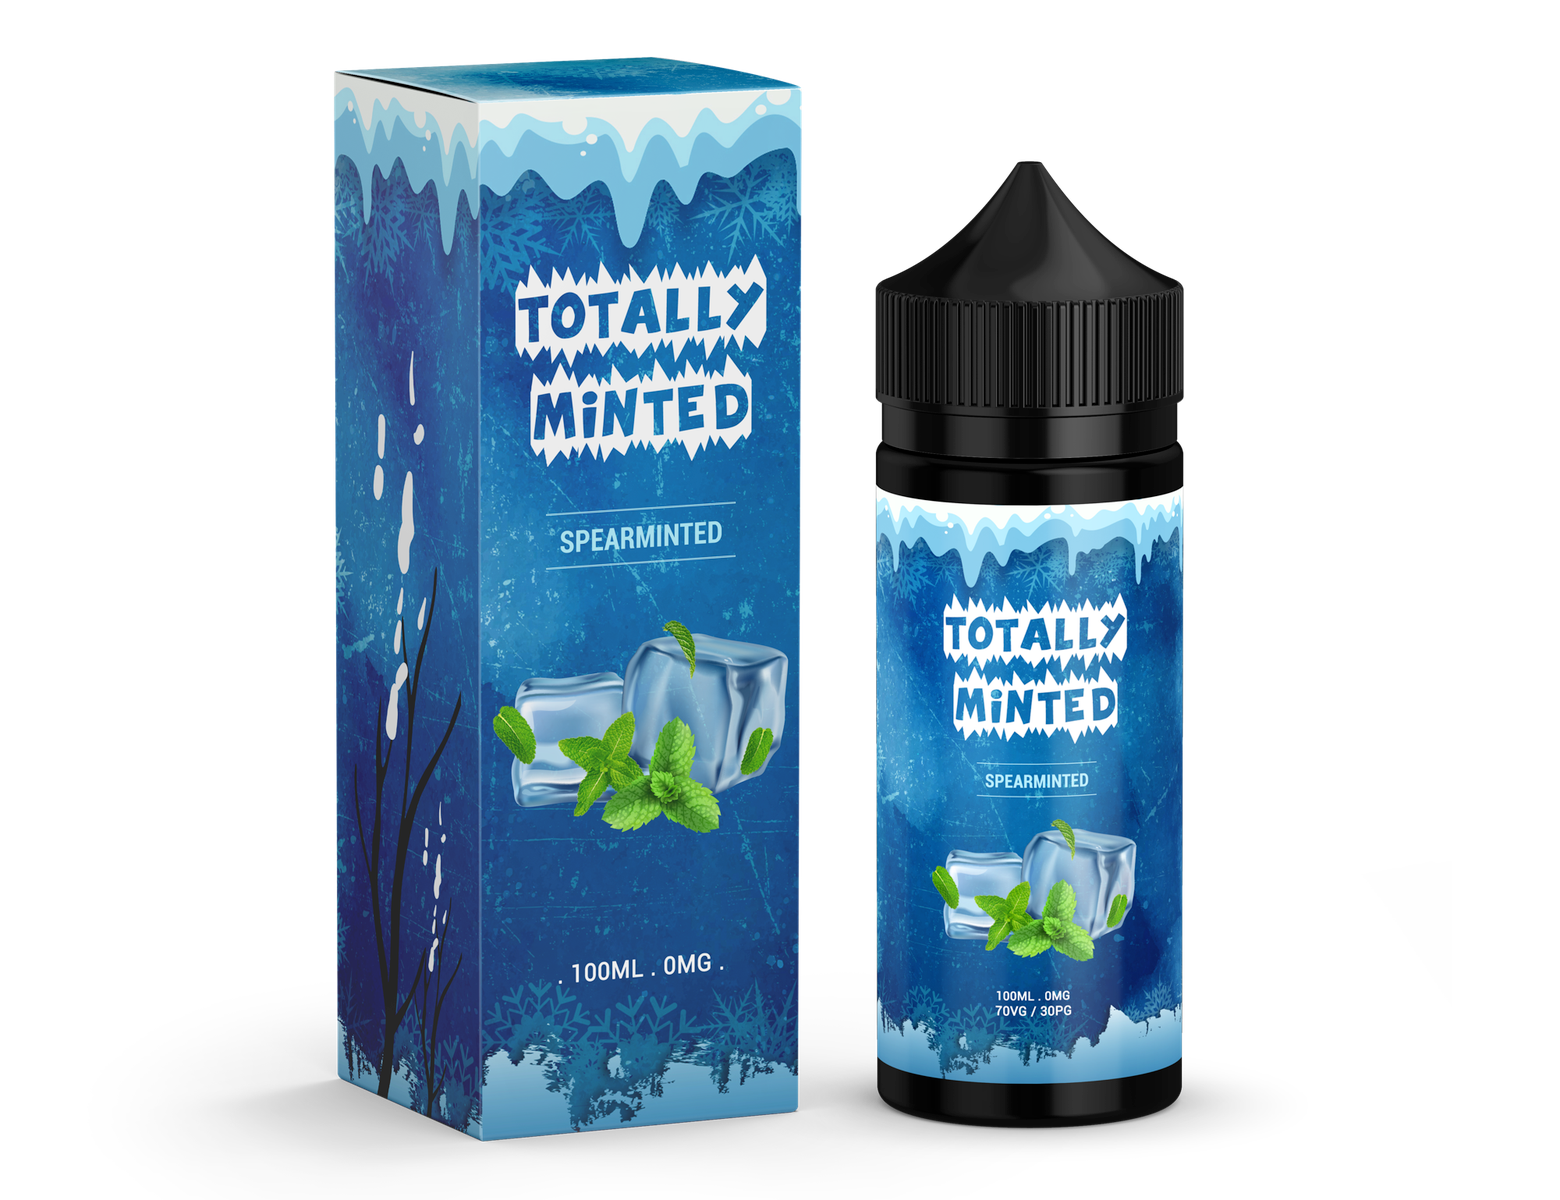 Totally Minted - Spearminted 100ML